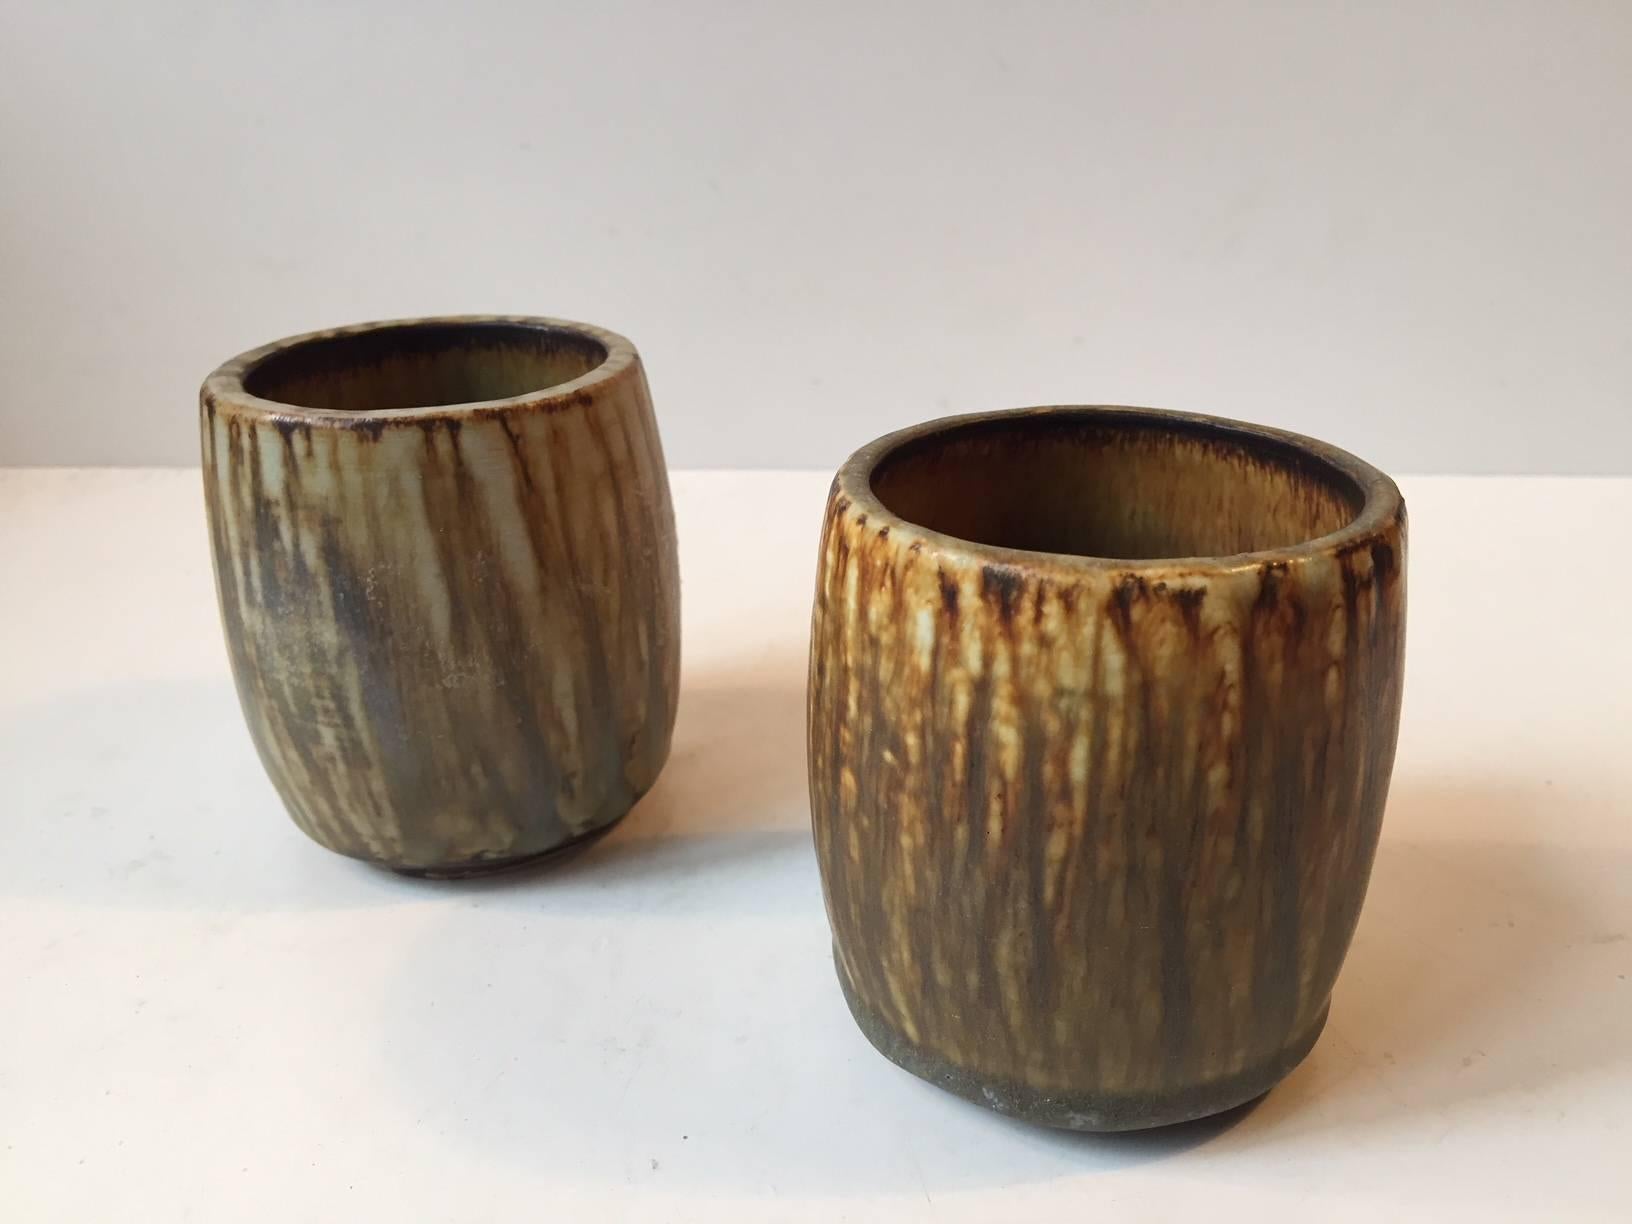 This matching pair of small ceramic vases with taupe-brown hares fur glaze was designed by Gunnar Nylund and created in the workshop at Rörstrand in Sweden during the late 1950s.